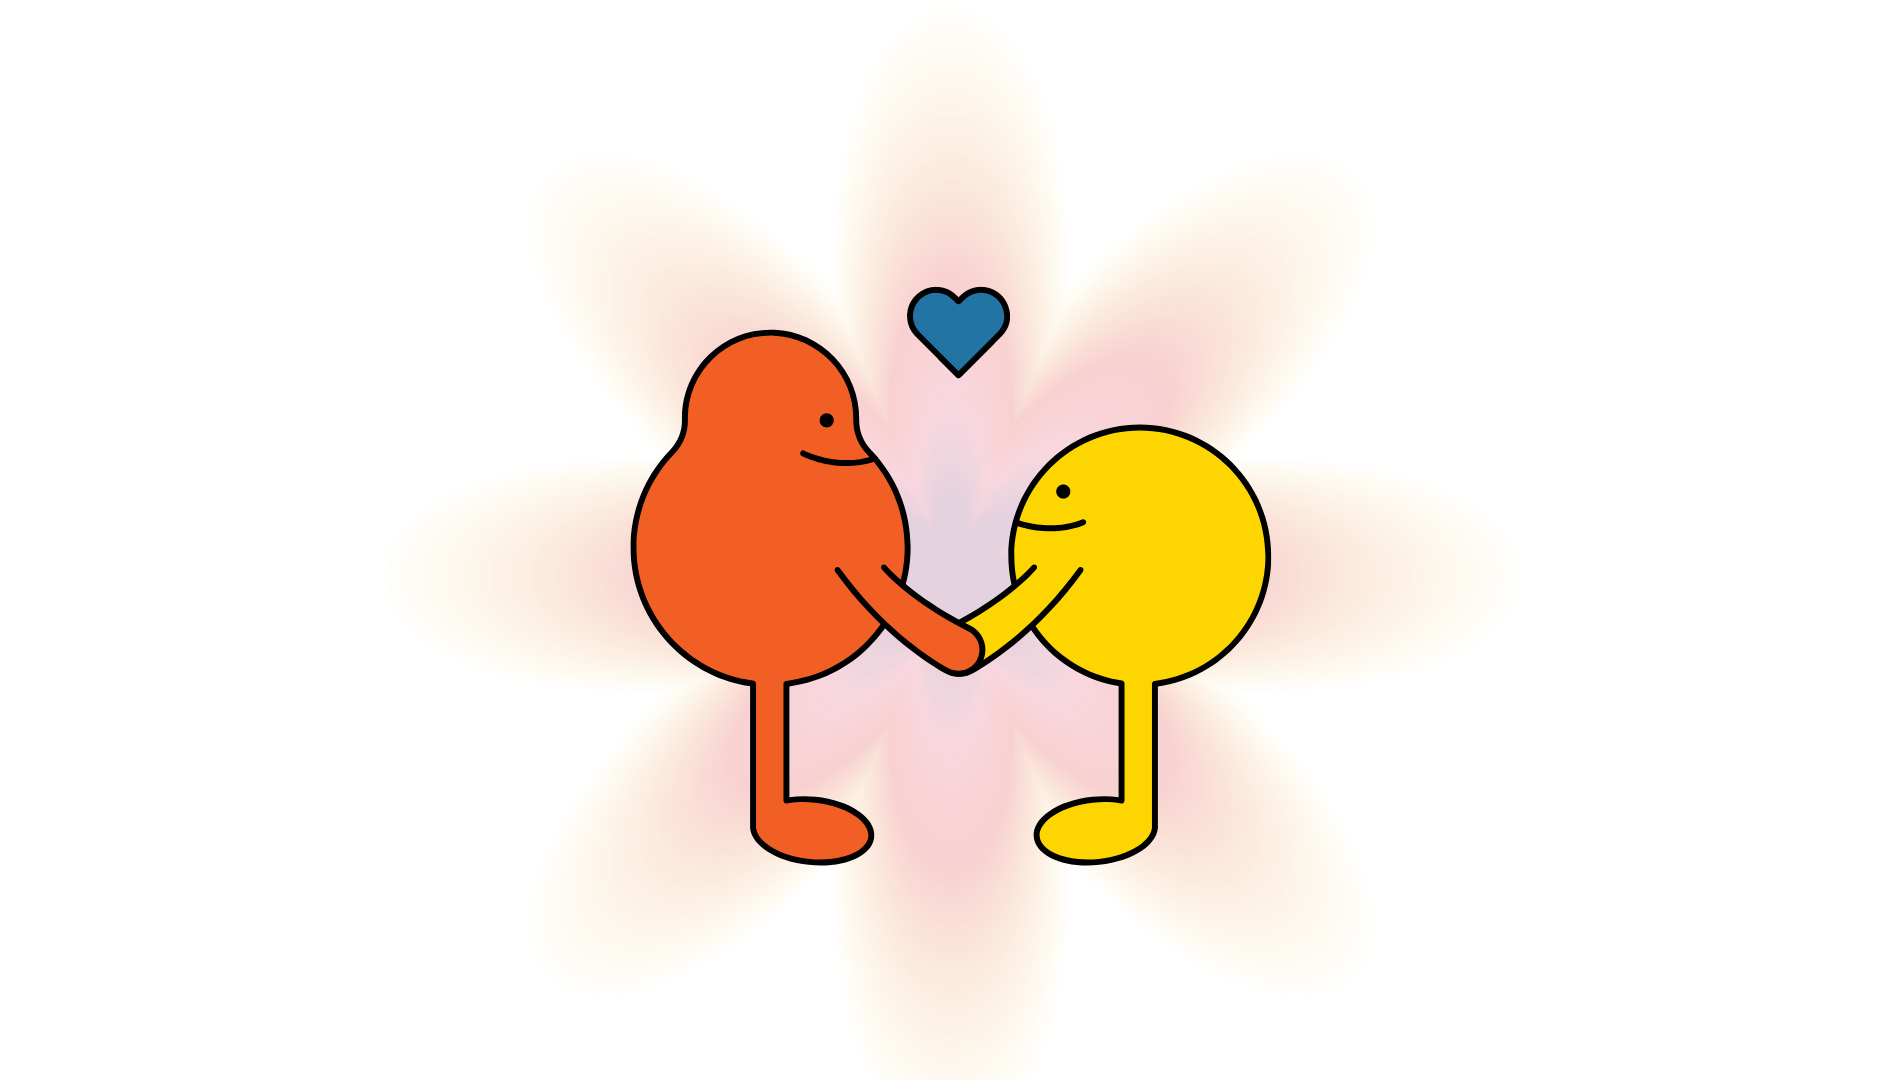 two cartoon friends facing eachother and holding hands with a simple blue heart above and between them